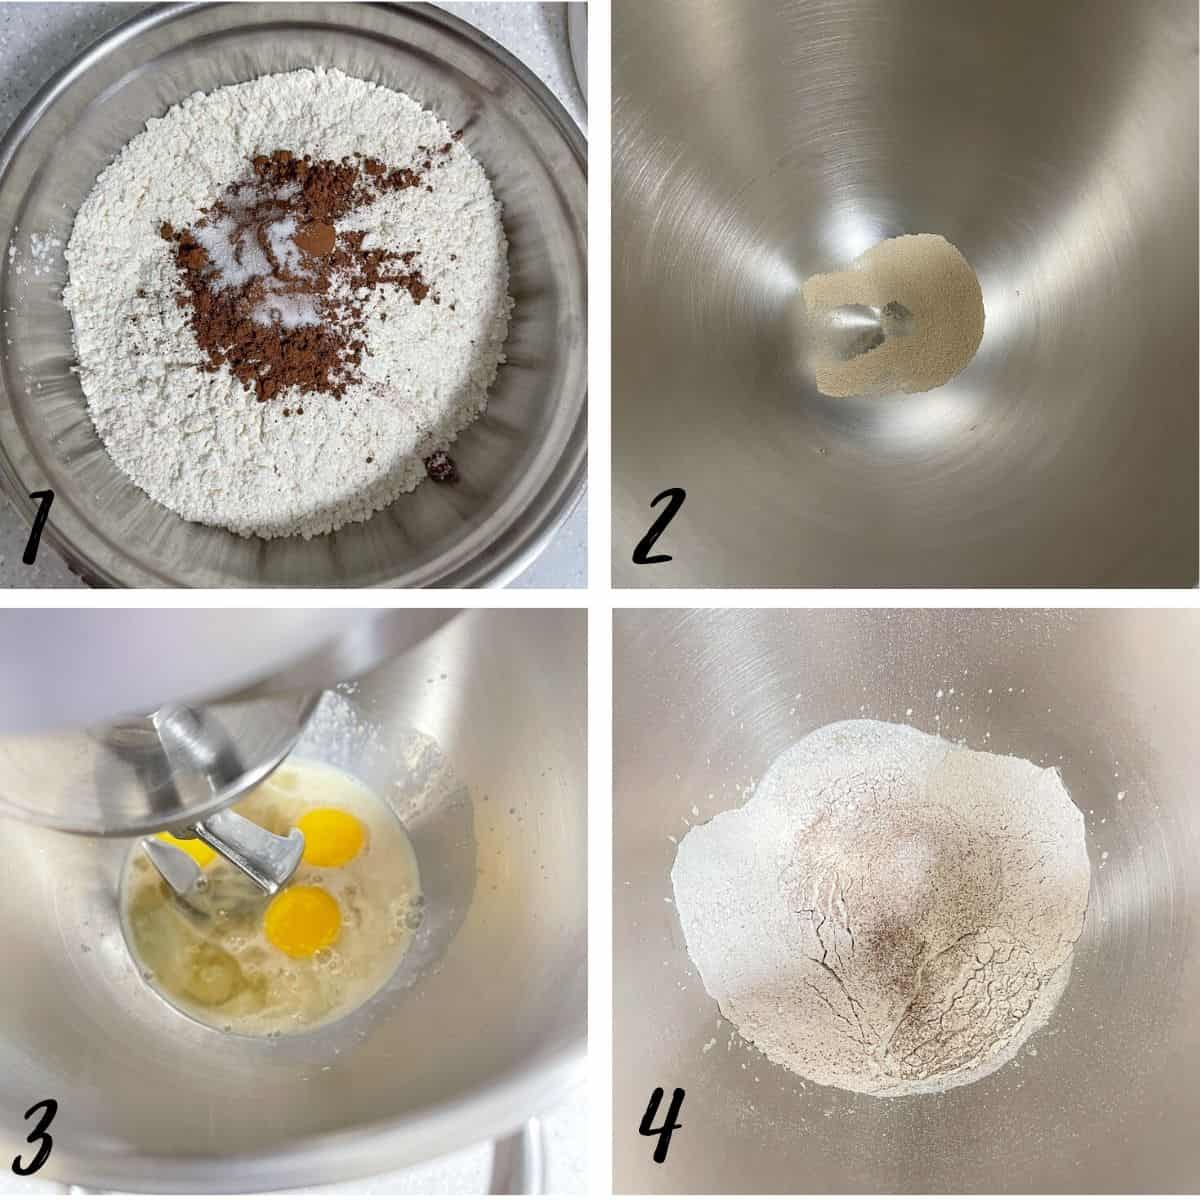 A poster of 4 images showing how to mix yeast, eggs, milk, sugar and flour to make bread.